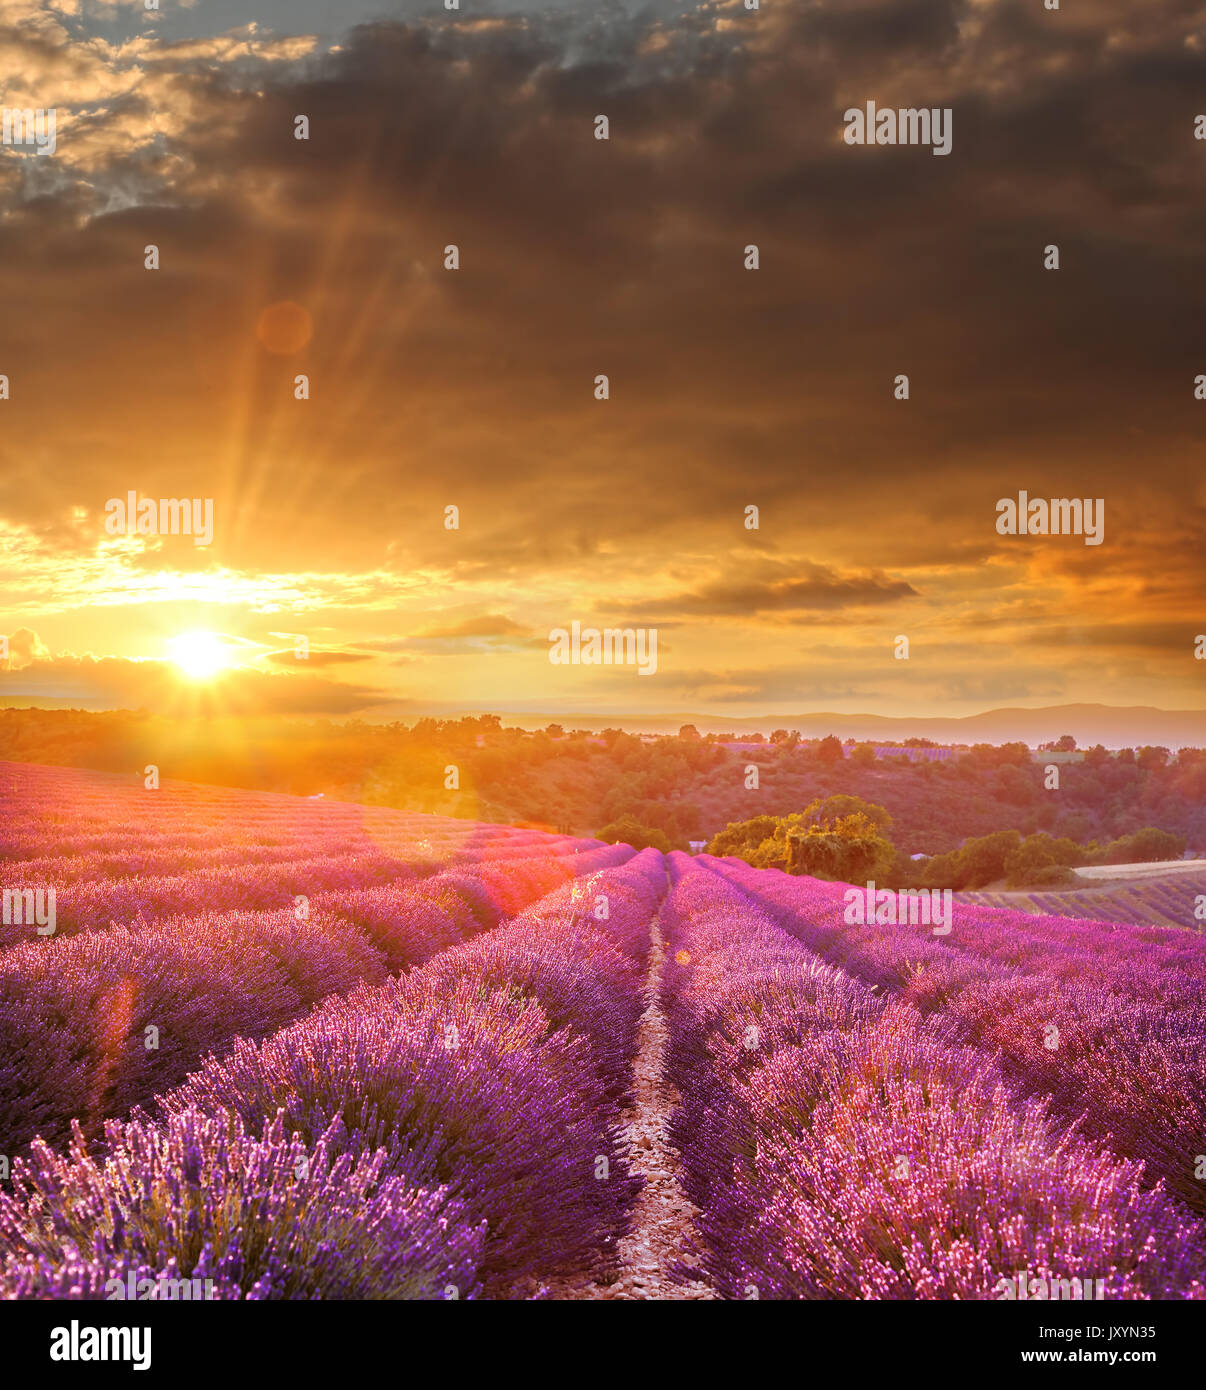 Lavender field against colorful sunset in Provence, France Stock Photo